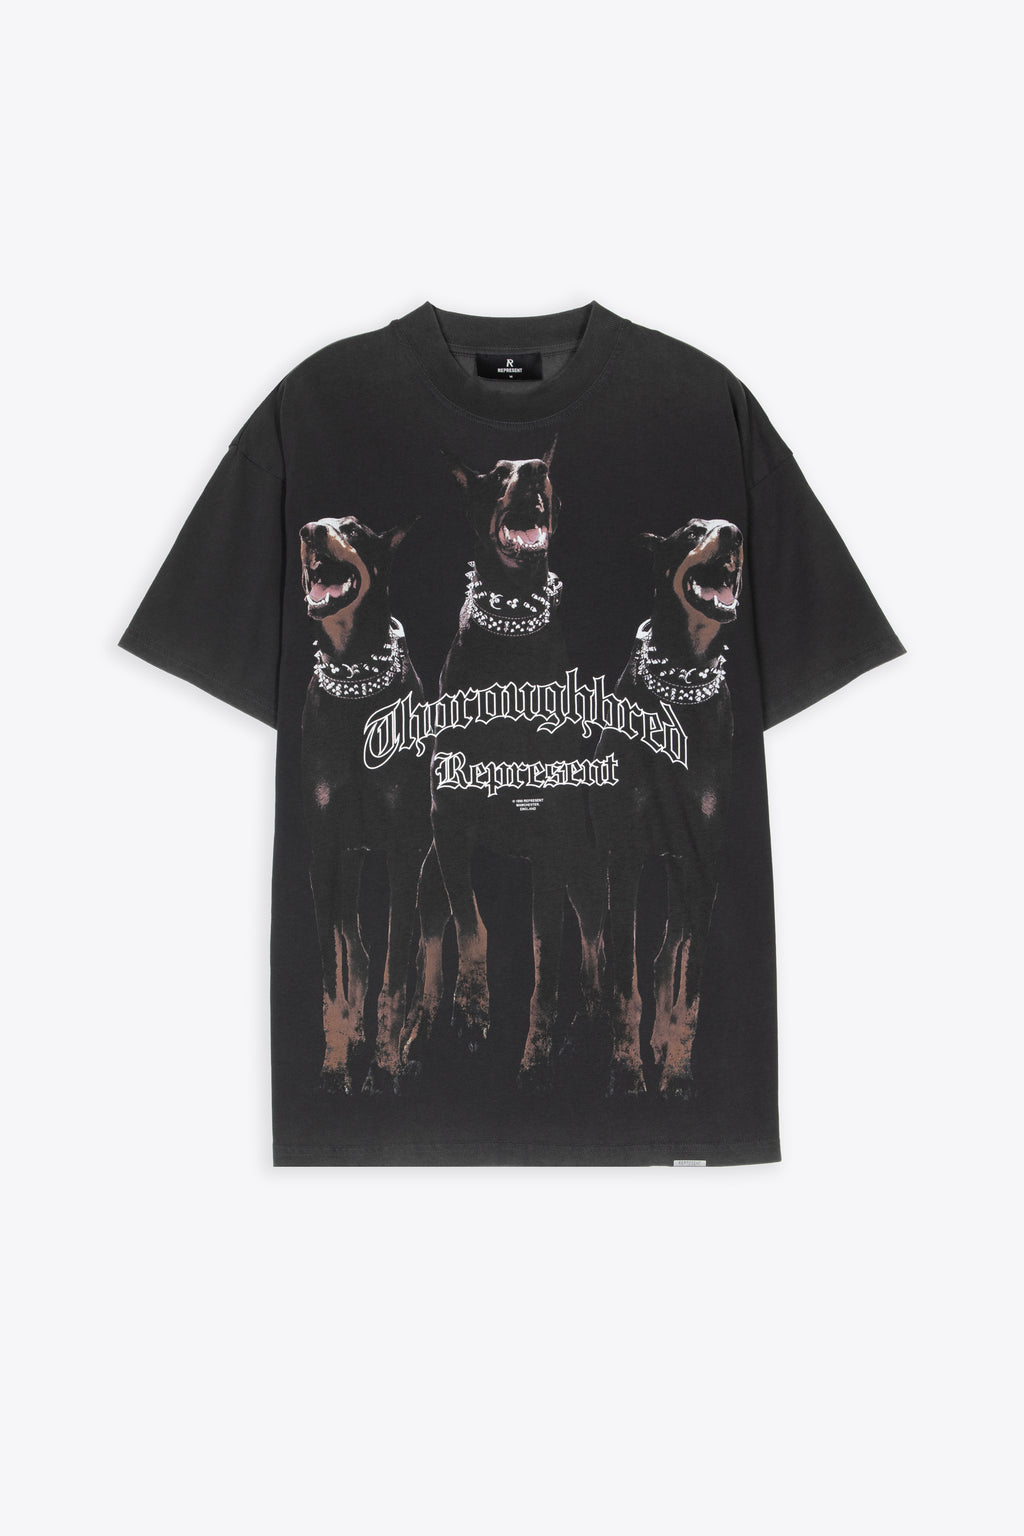 alt-image__Washed-black-t-shirt-with-graphic-print---Horoughbred-T-shirt-